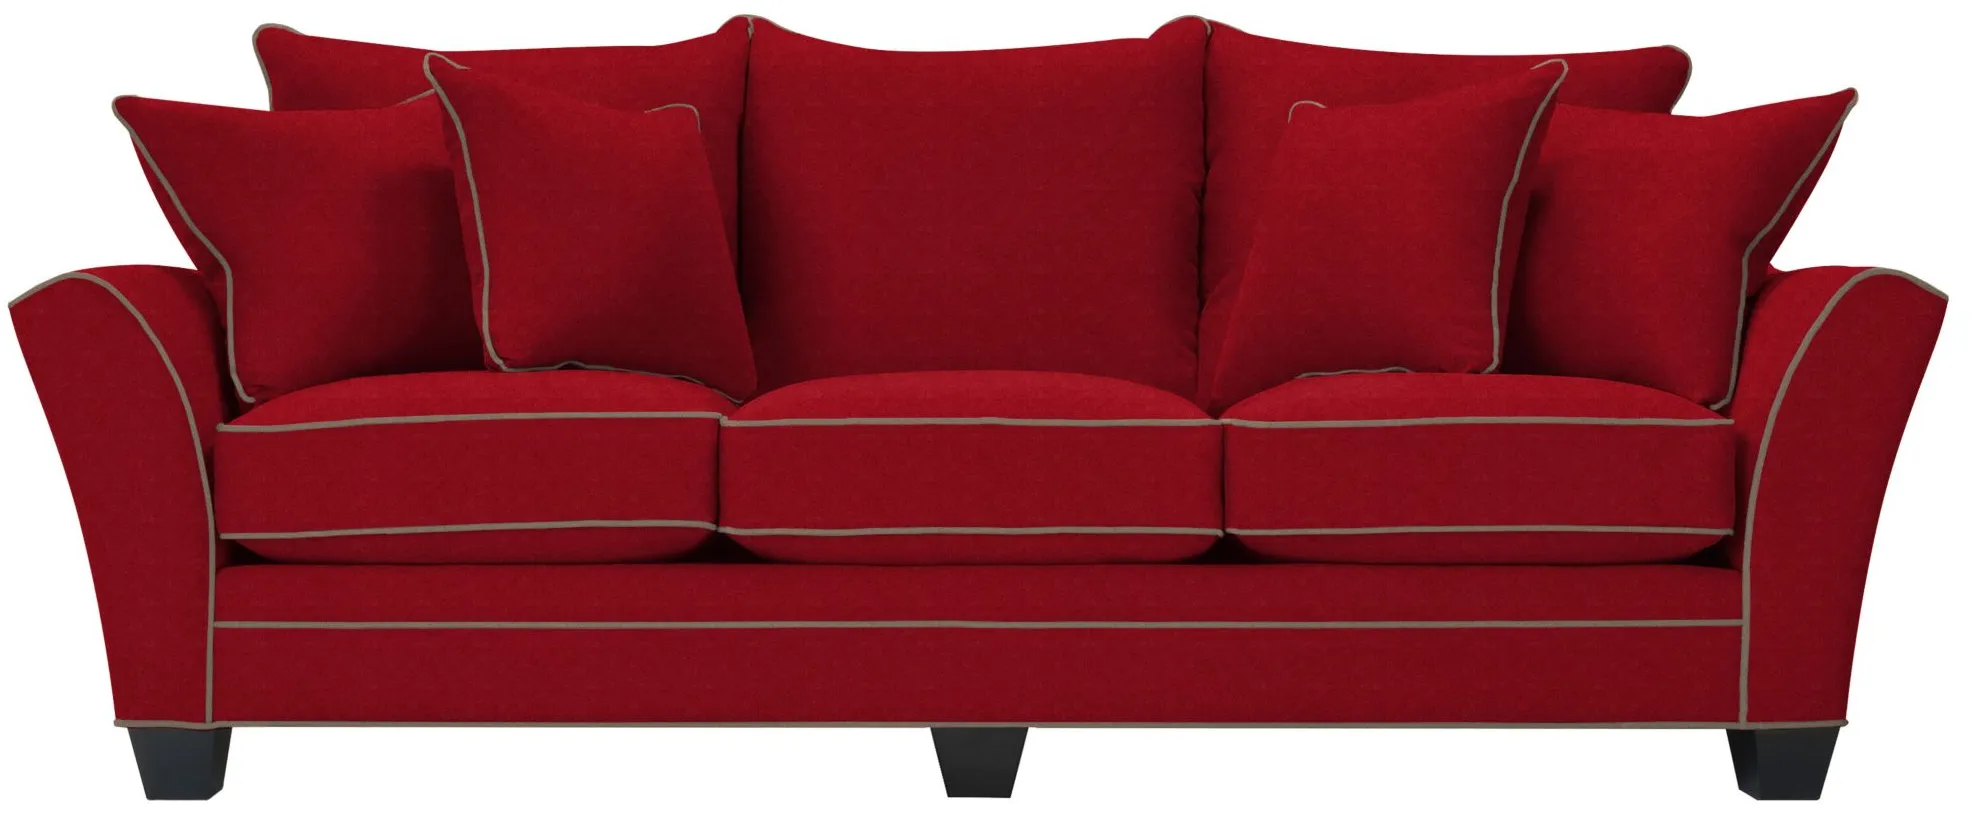 Briarwood Queen Plus Sleeper Sofa in Suede So Soft Cardinal/Mineral by H.M. Richards